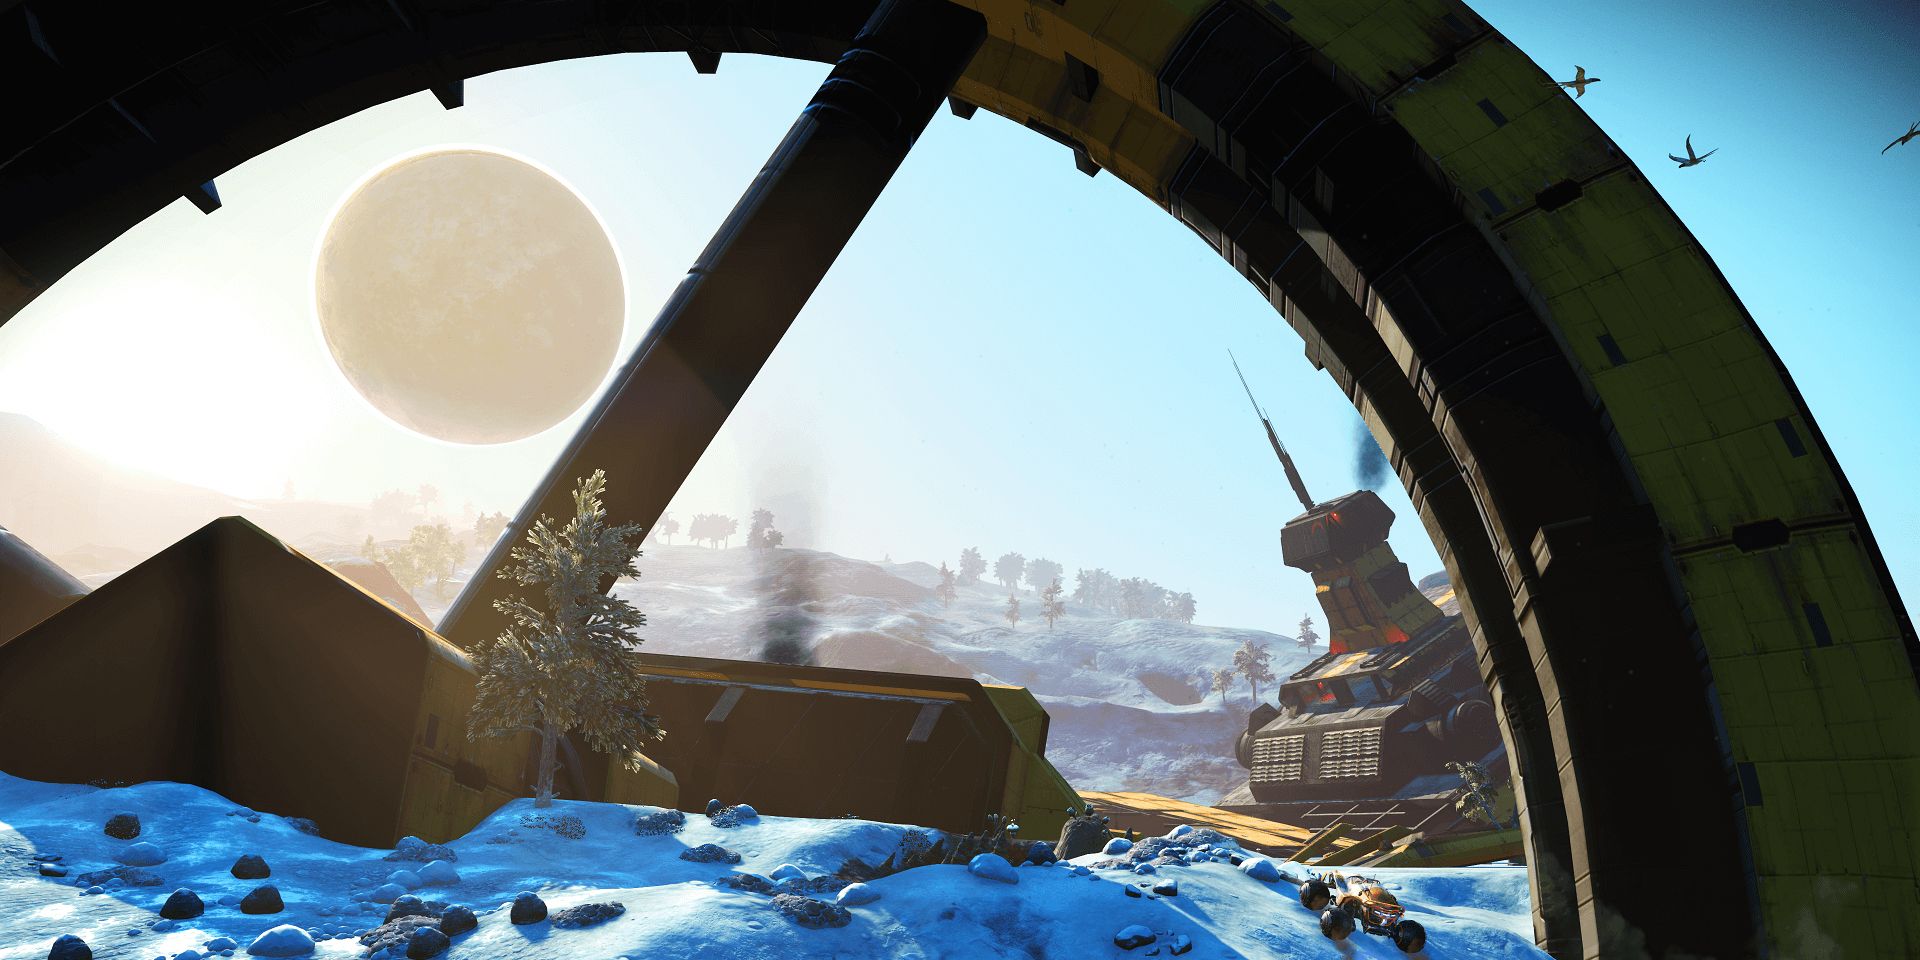 No Mans Sky, a snow planet with circular alien ruins and a large moon.